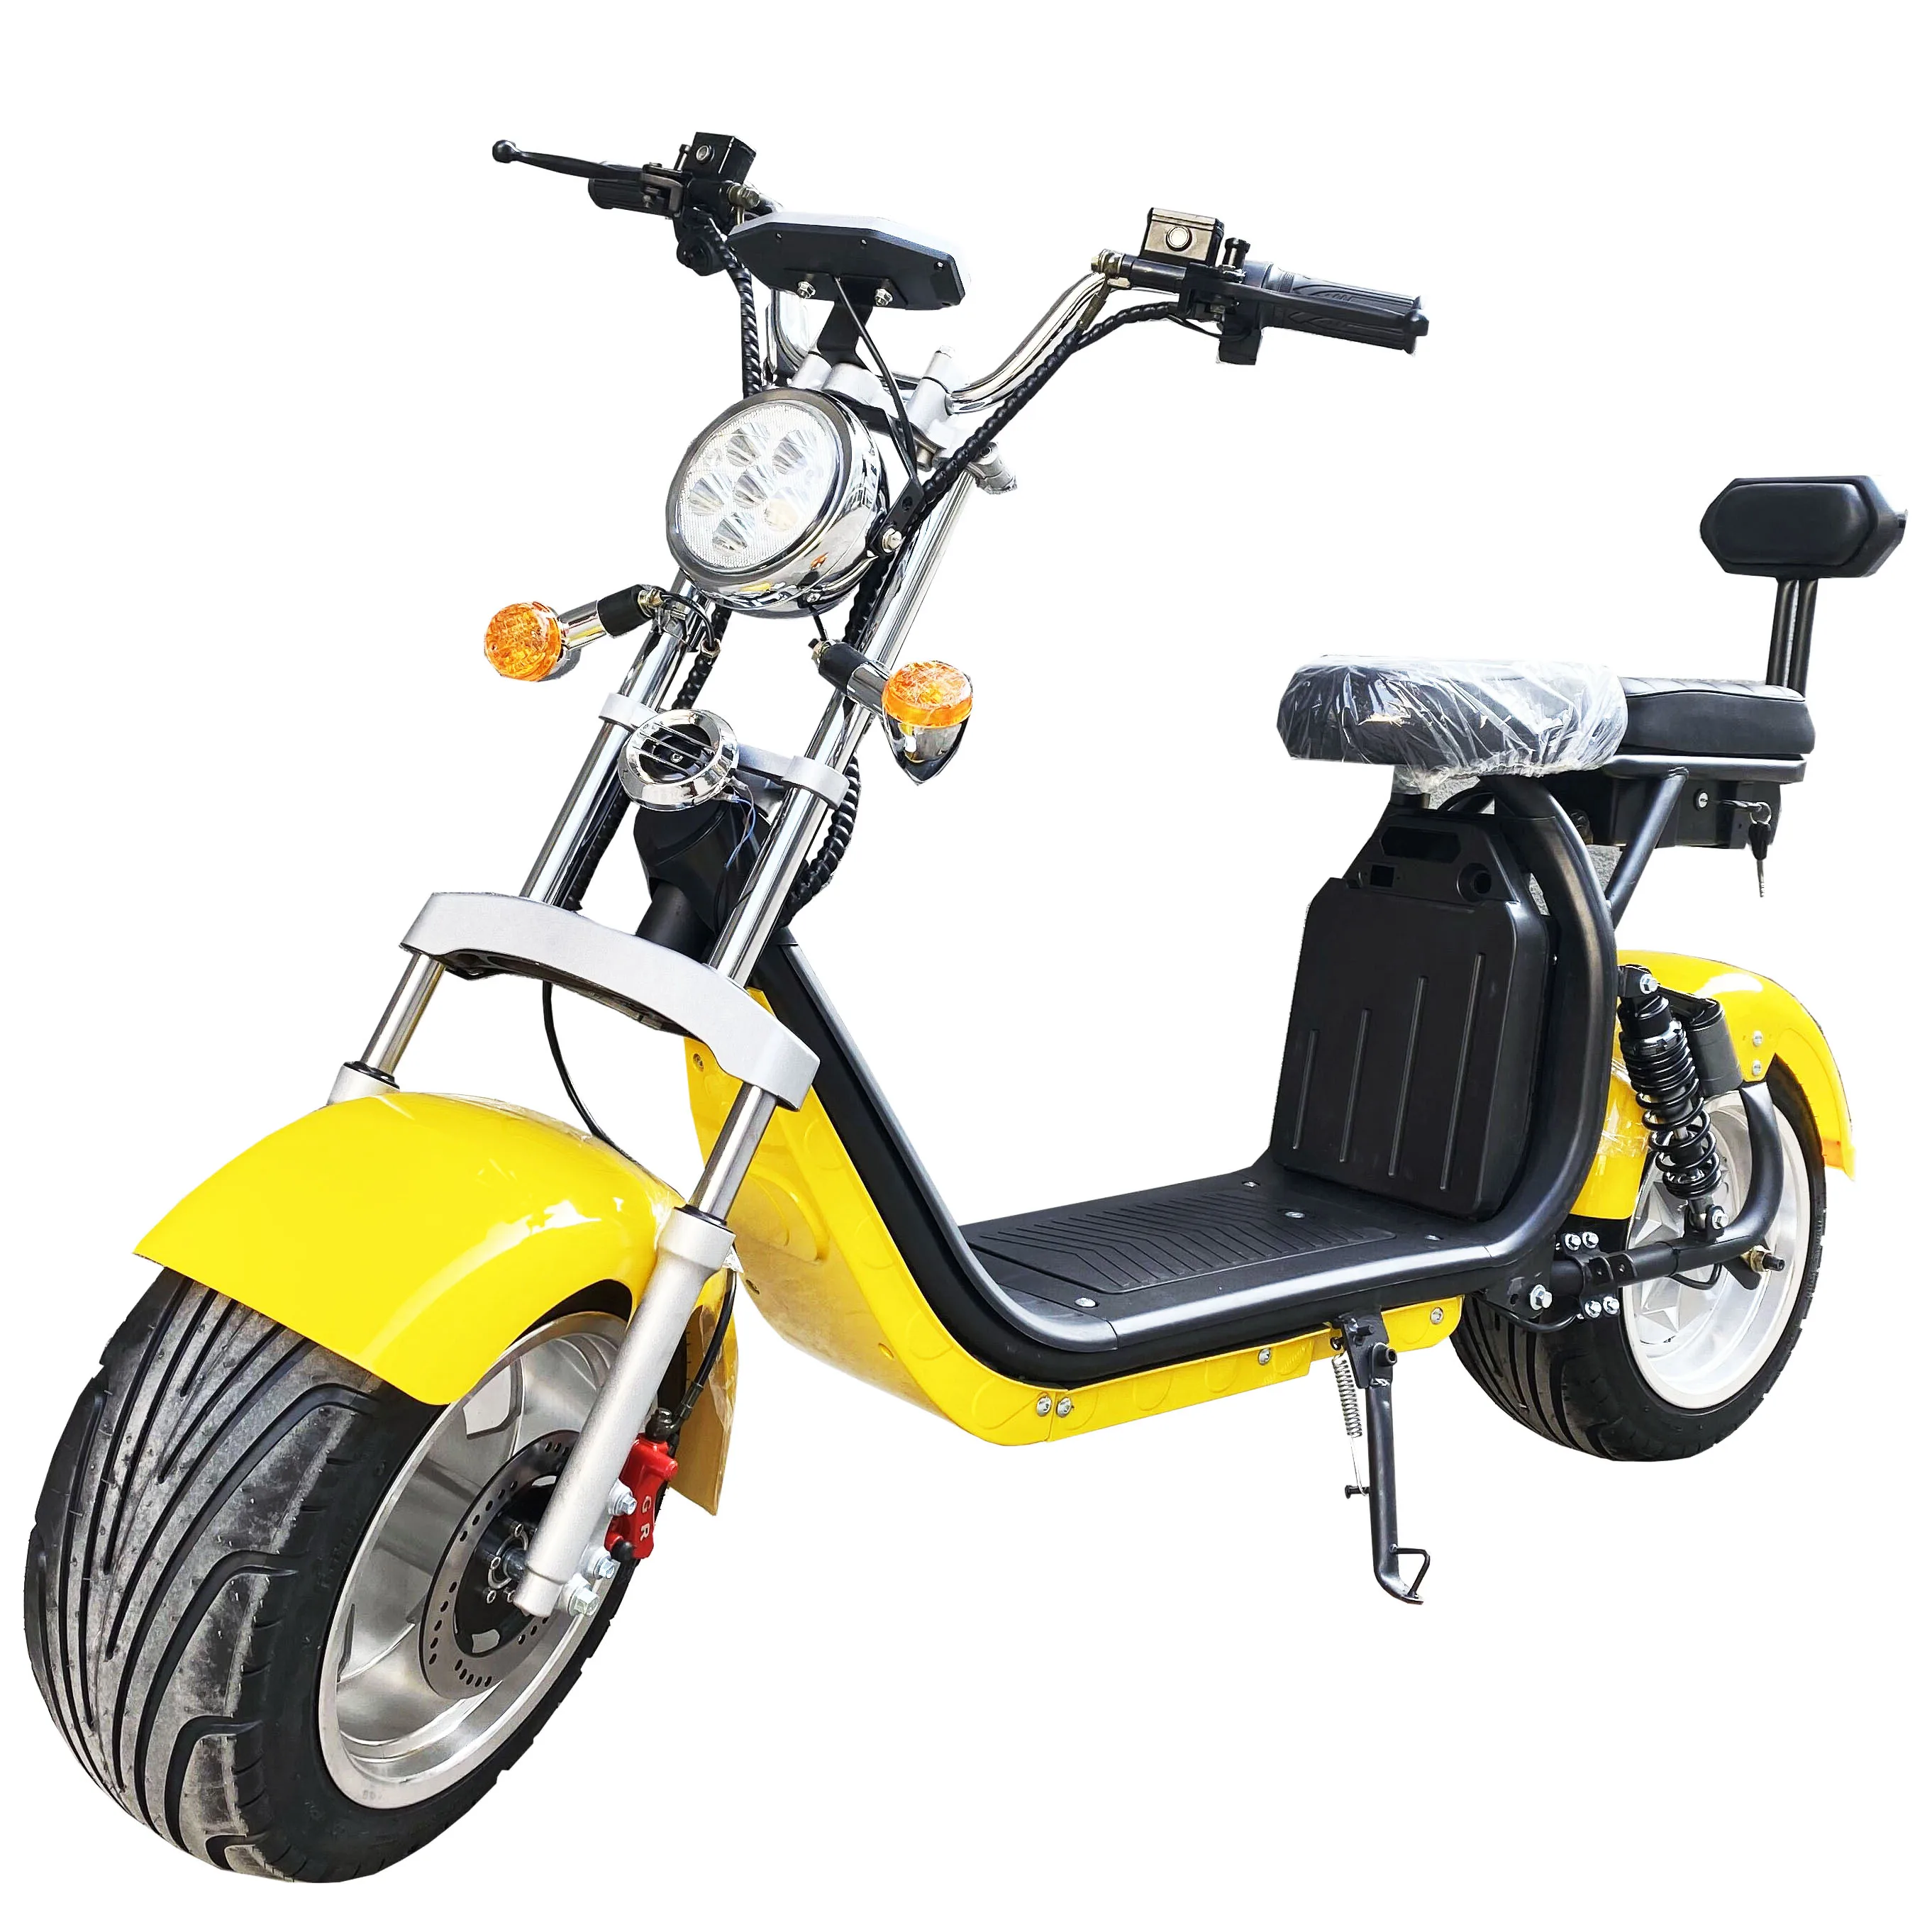 Europe Warehouse Germany Citycoco Scooter 2000w 1500w Fat Tire Adult Electric Motorcycle with EEC